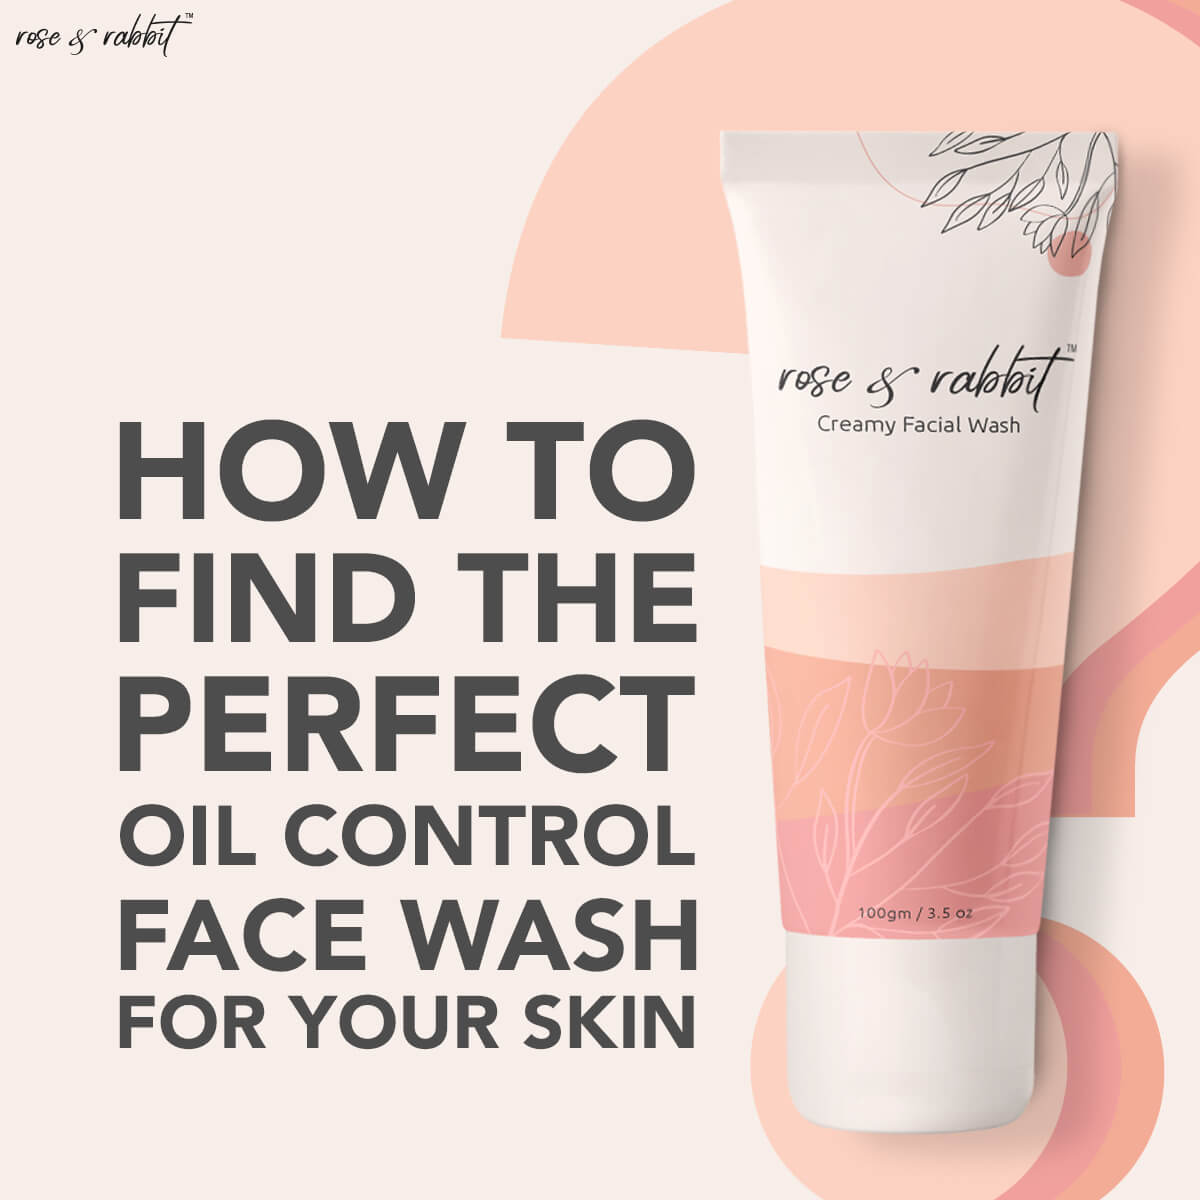 How To Find The Perfect Oil Control Face Wash For Your Skin